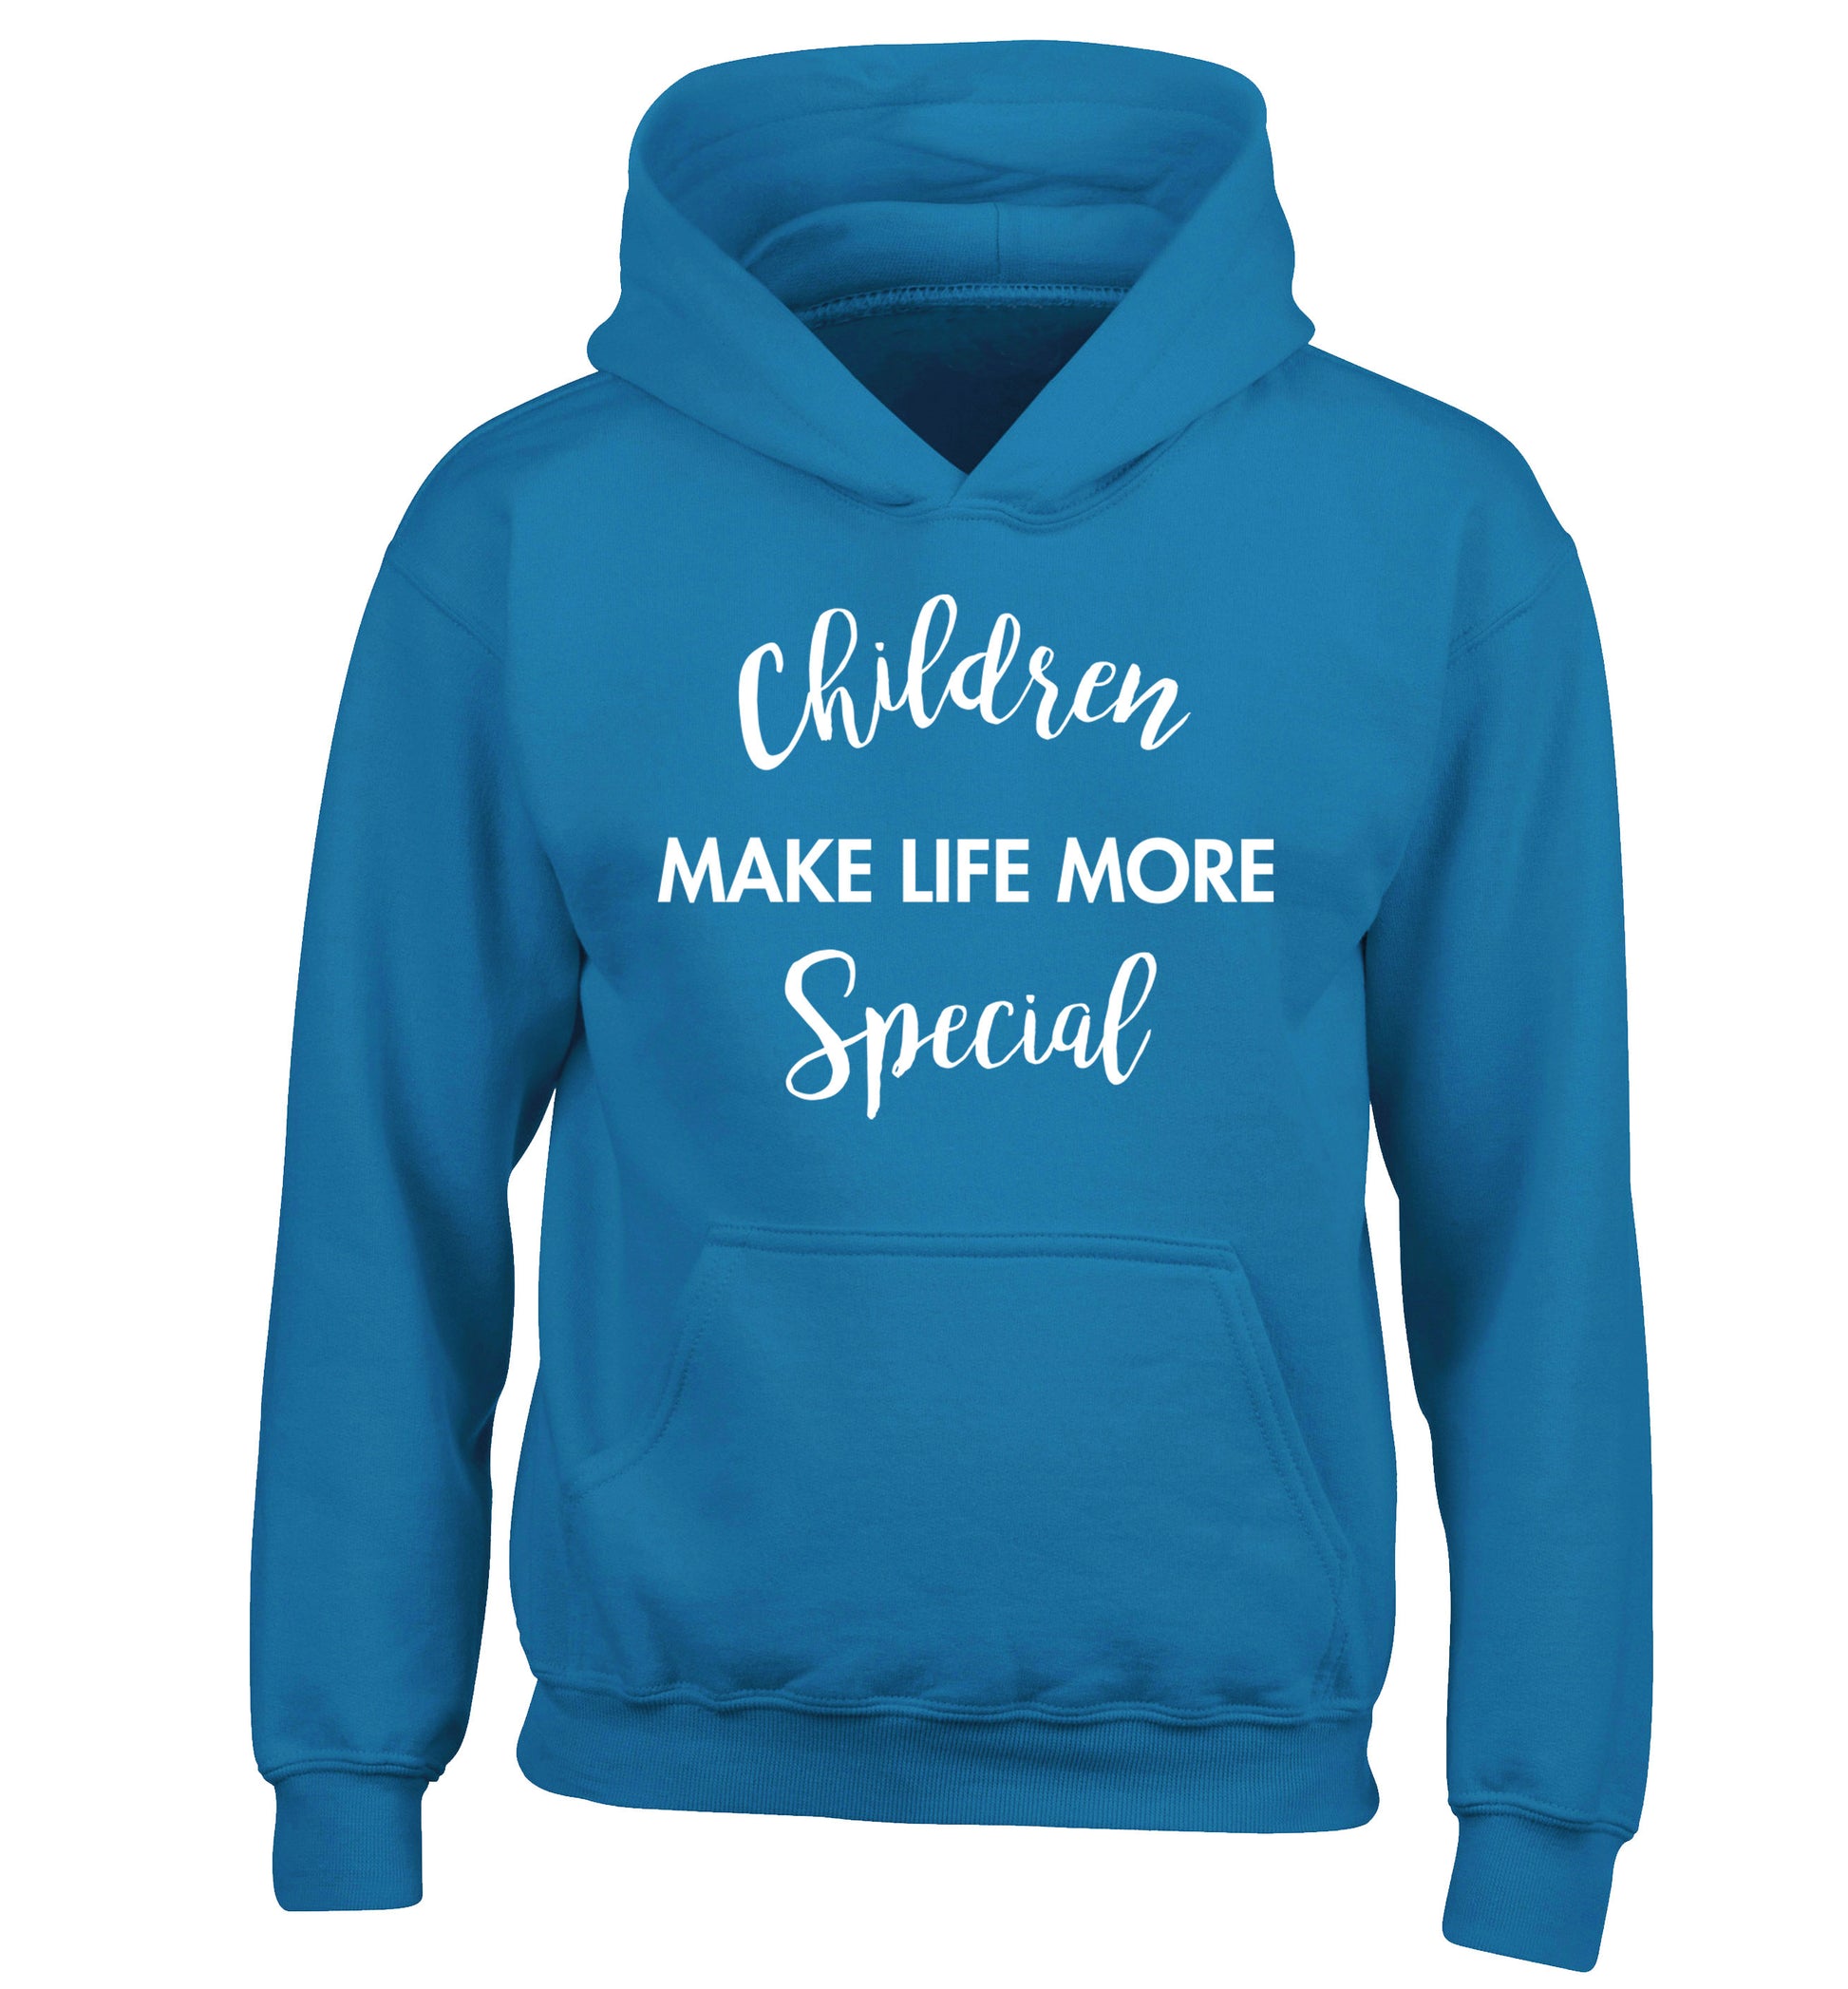 Children make life more special children's blue hoodie 12-14 Years